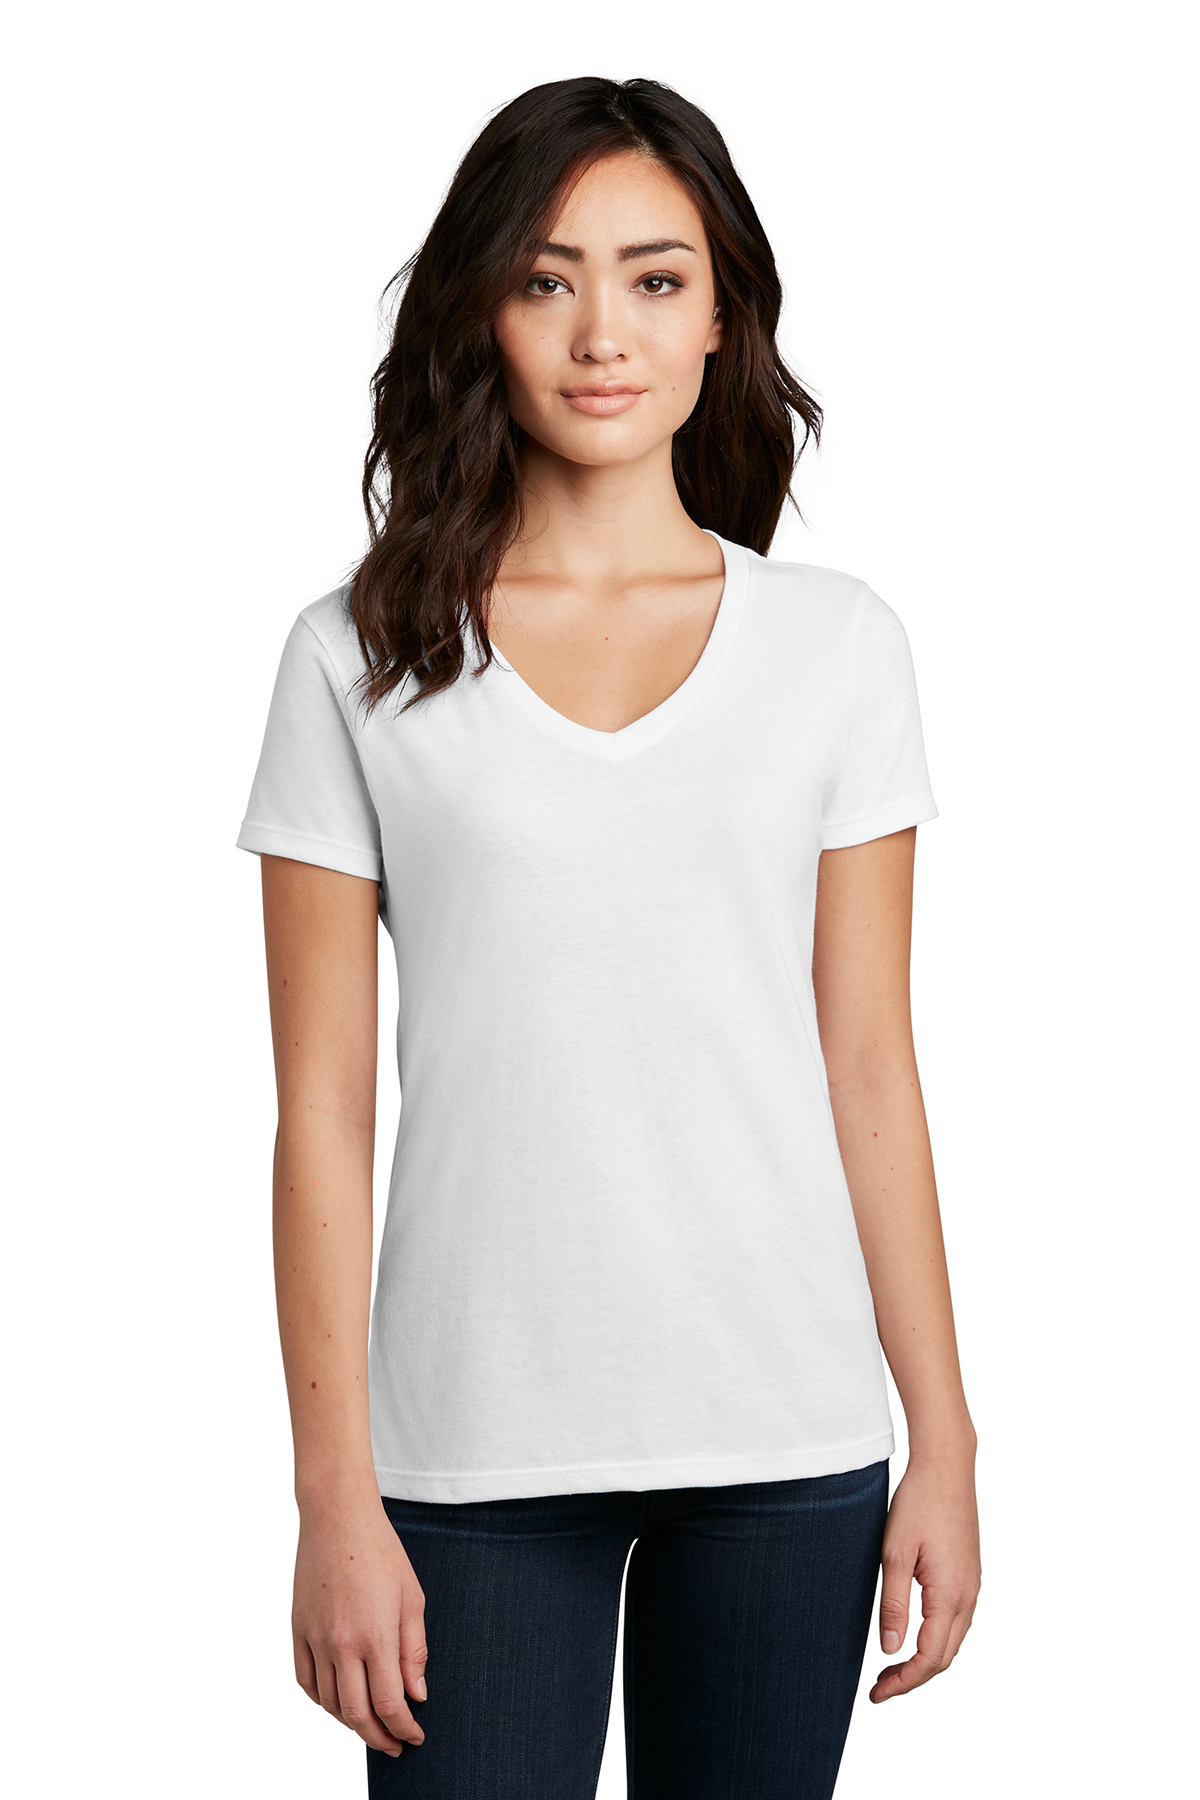 District Women's Perfect Blend V-Neck Tee | Product | District